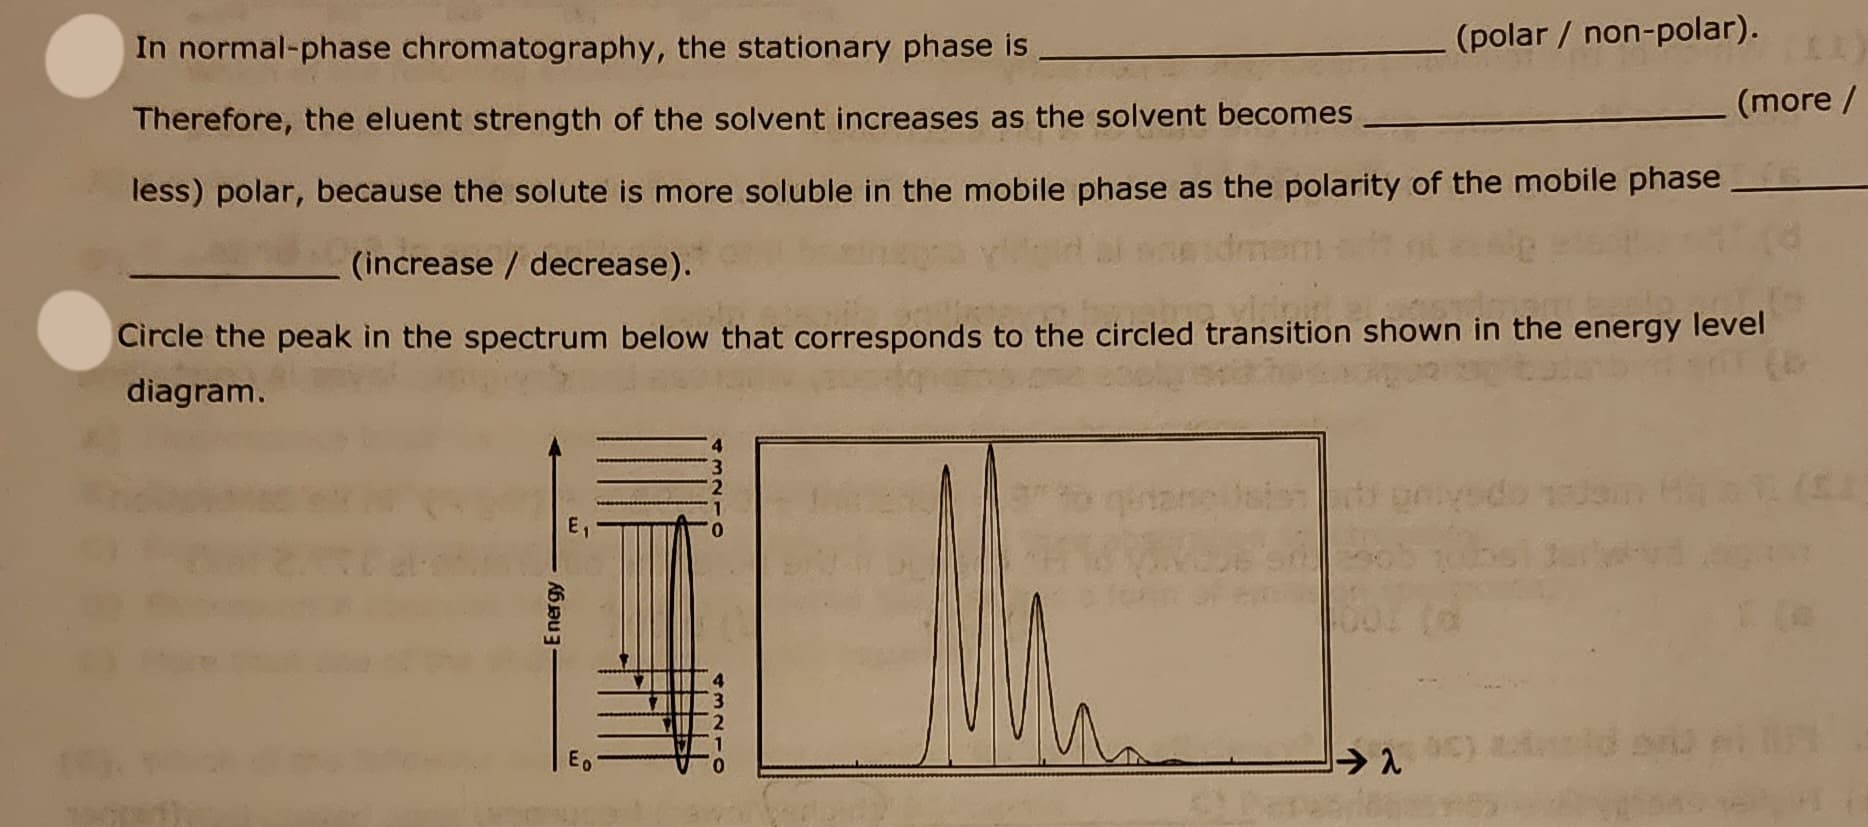 In normal-phase chromatography, the stationary phase is
Therefore, the eluent strength of the solvent increases as the solvent becomes
less) polar, because the solute is more soluble in the mobile phase as the polarity of the mobile phase
-Energy
(polar / non-polar).
(increase / decrease).
Circle the peak in the spectrum below that corresponds to the circled transition shown in the energy level
diagram.
E₁
⇒ 2
(more /
1 (s